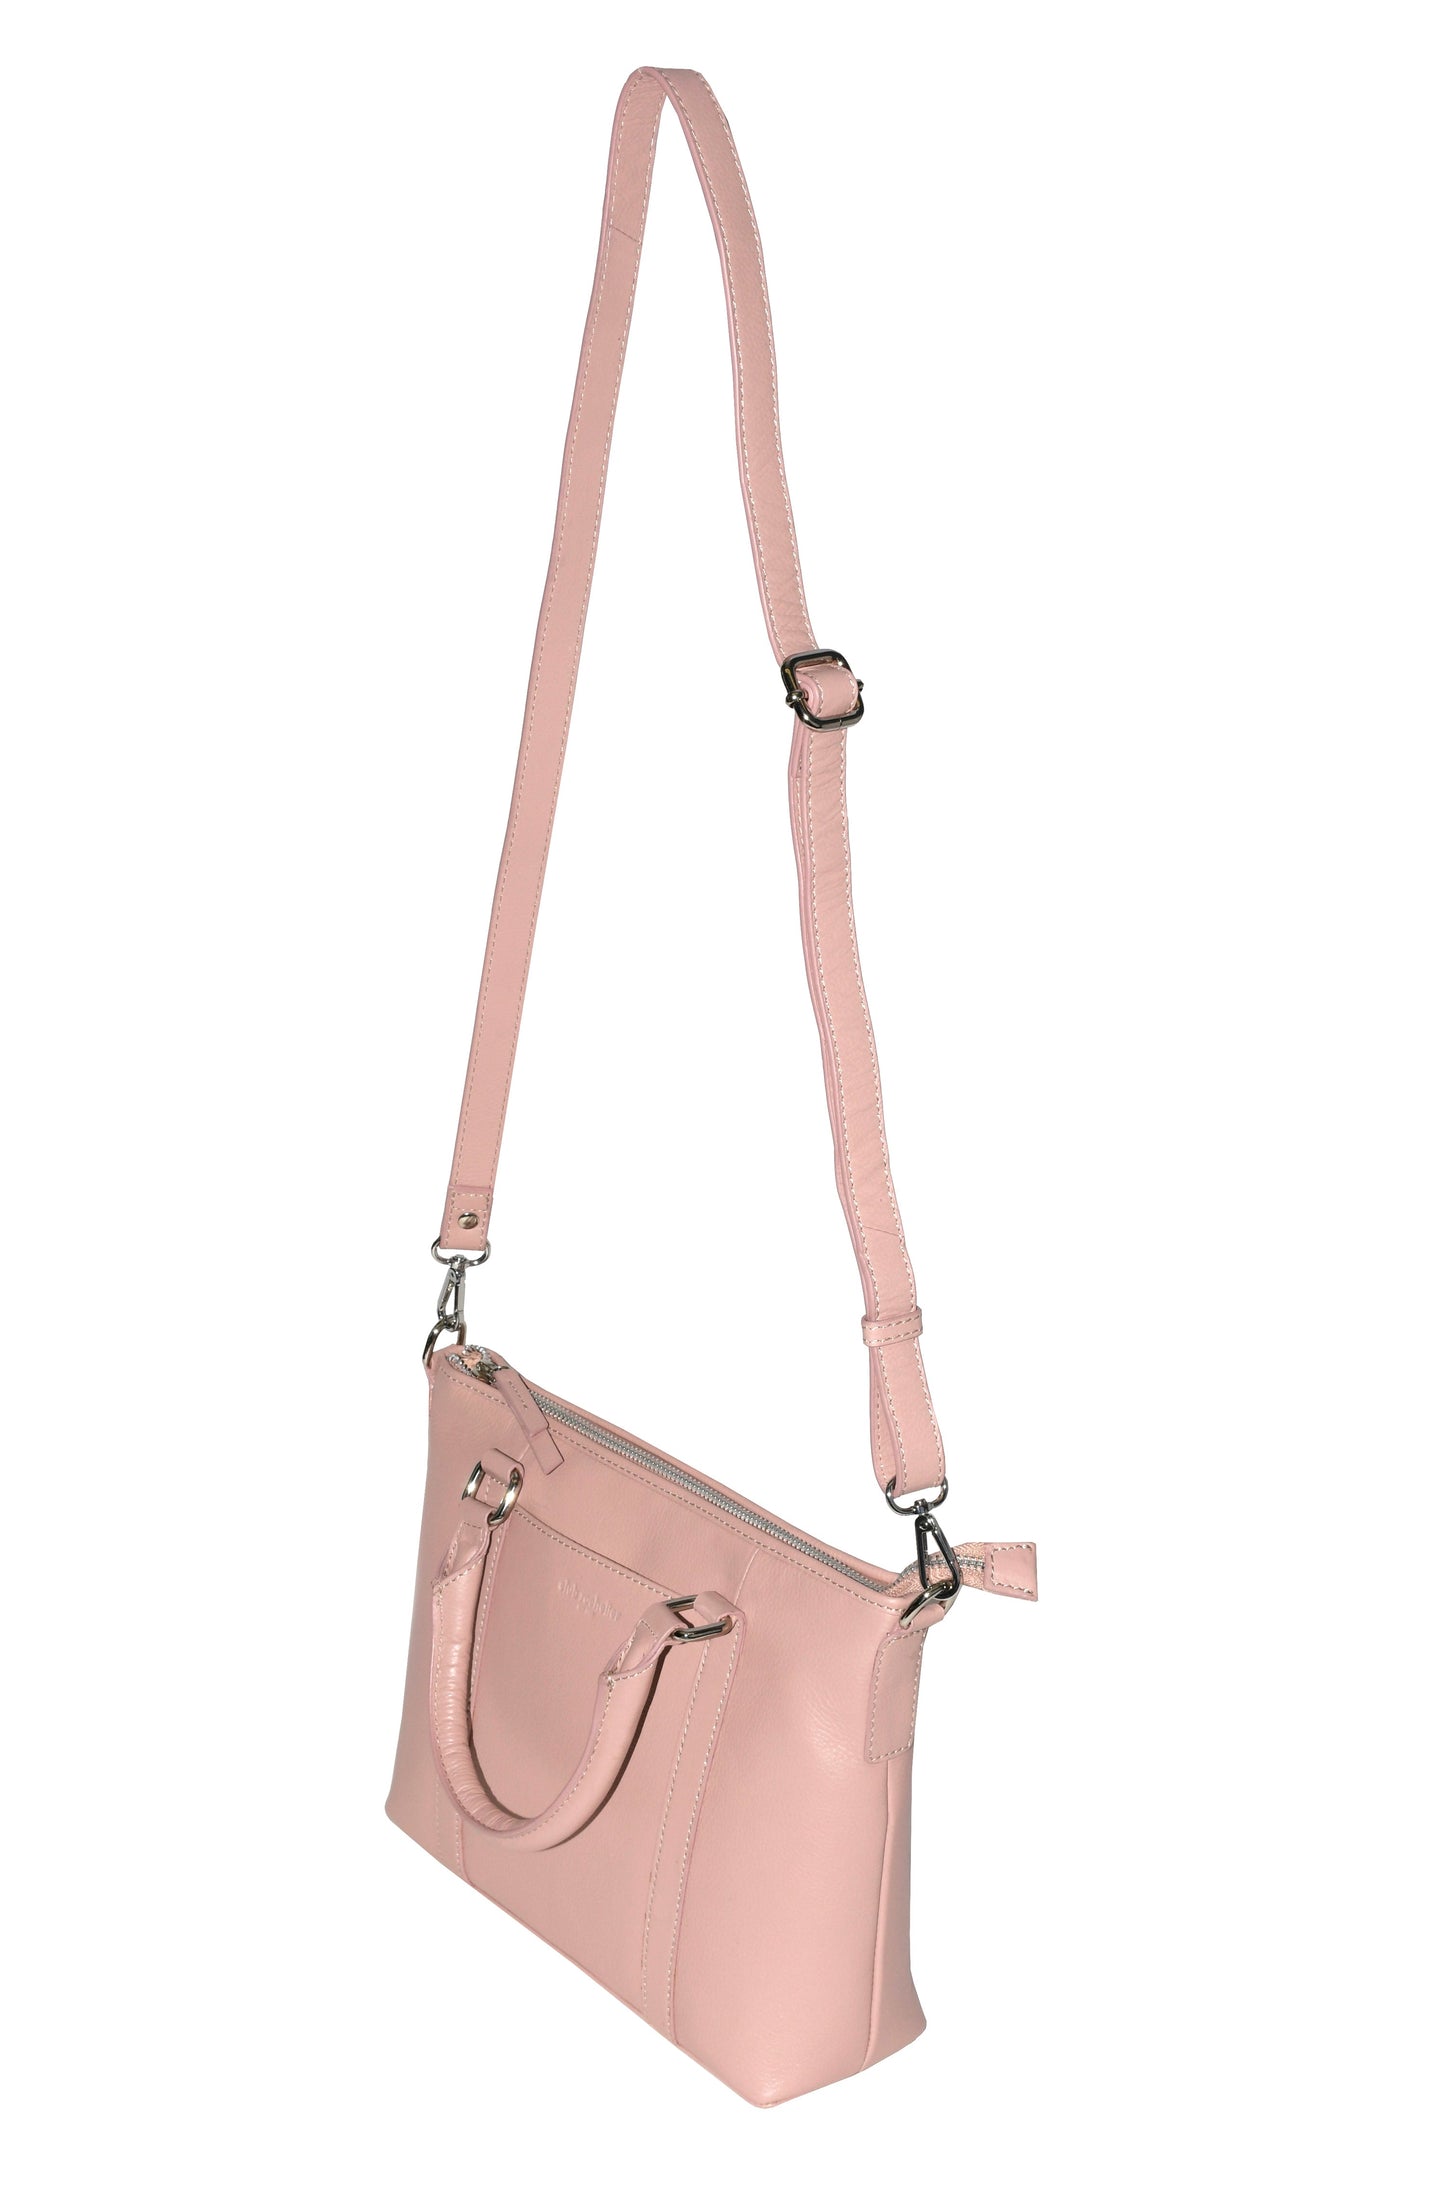 Leather Crossbody Bag with Tops Handles